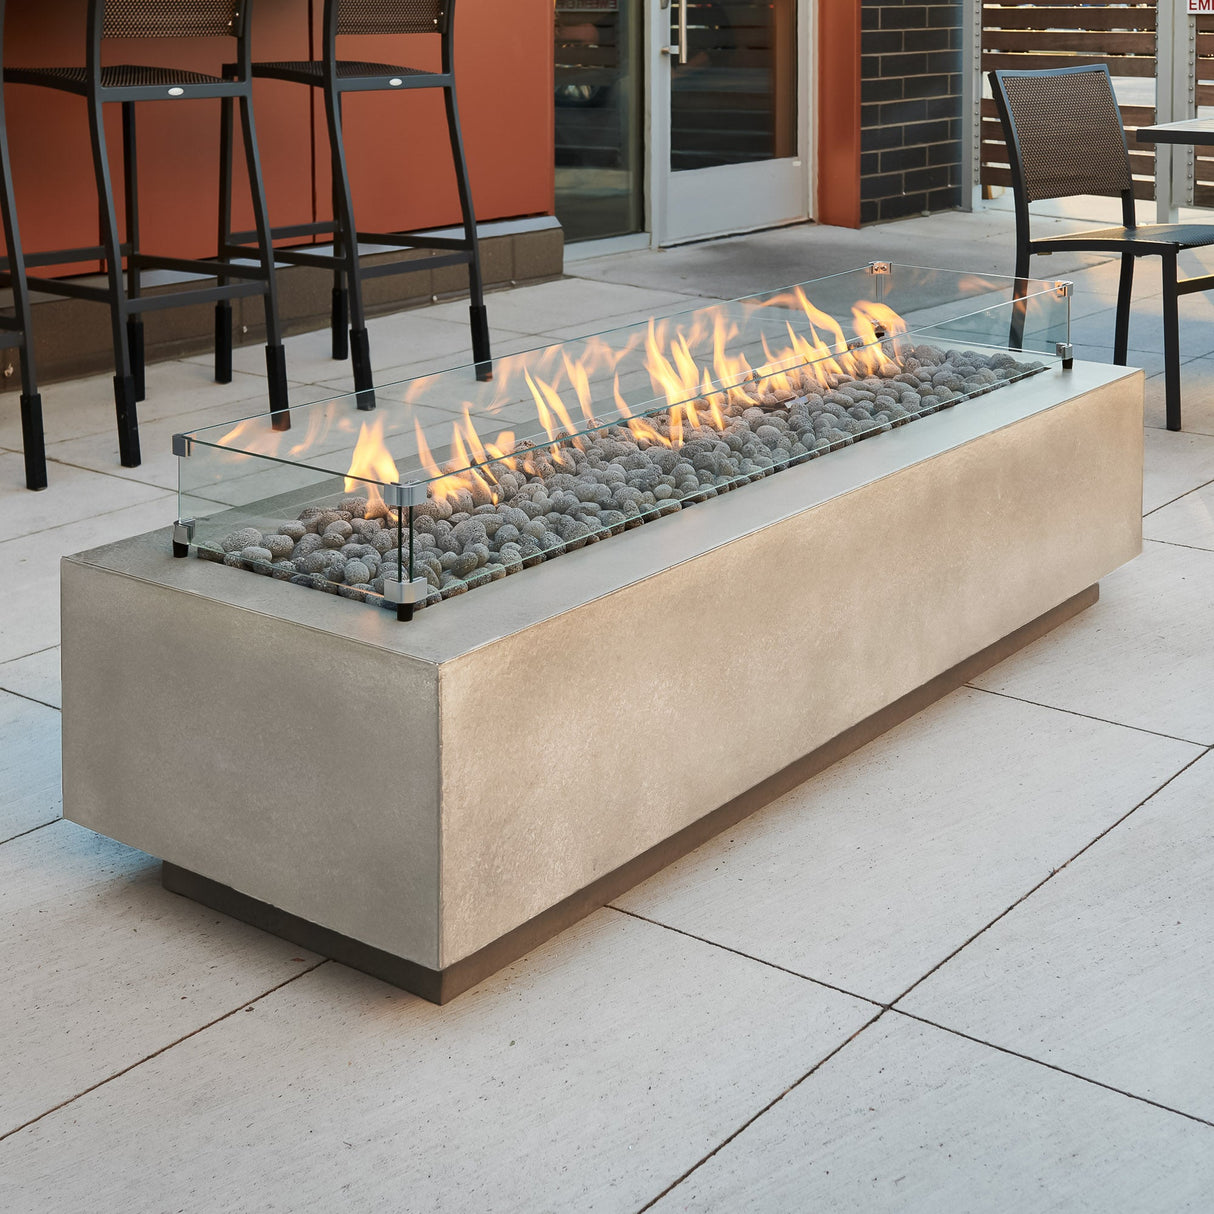 A Natural Grey Cove Linear Gas Fire Pit Table 72" with lava rocks and glass wind guard